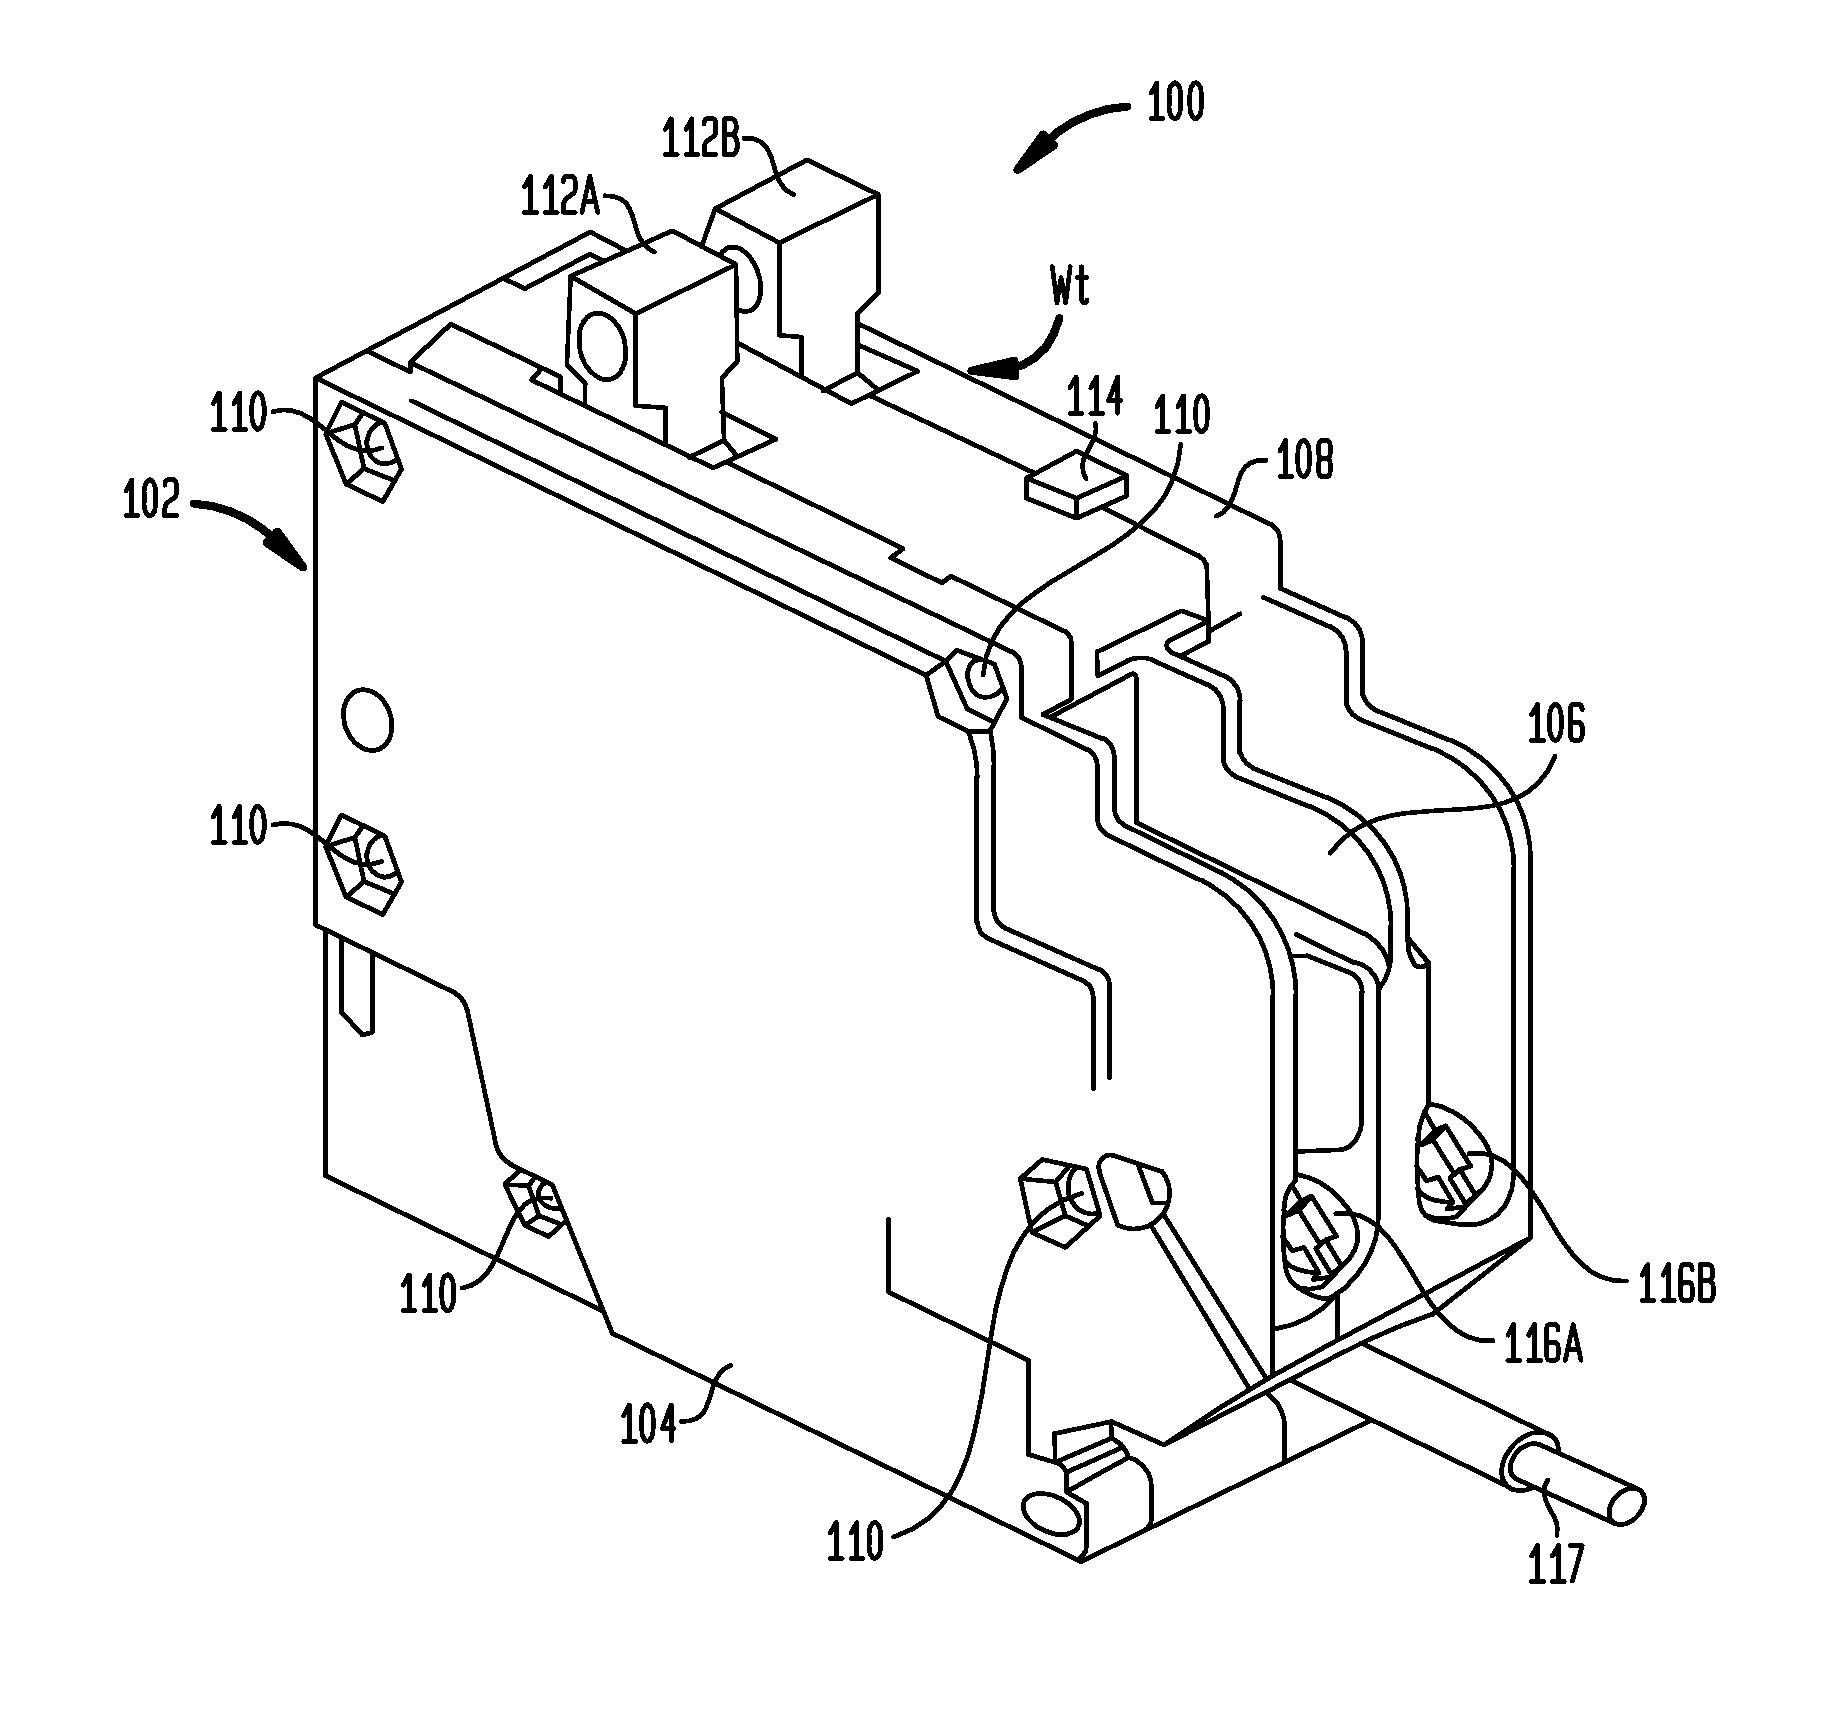 Low-profile electronic circuit breakers, breaker tripping mechanisms, and systems and methods of using same